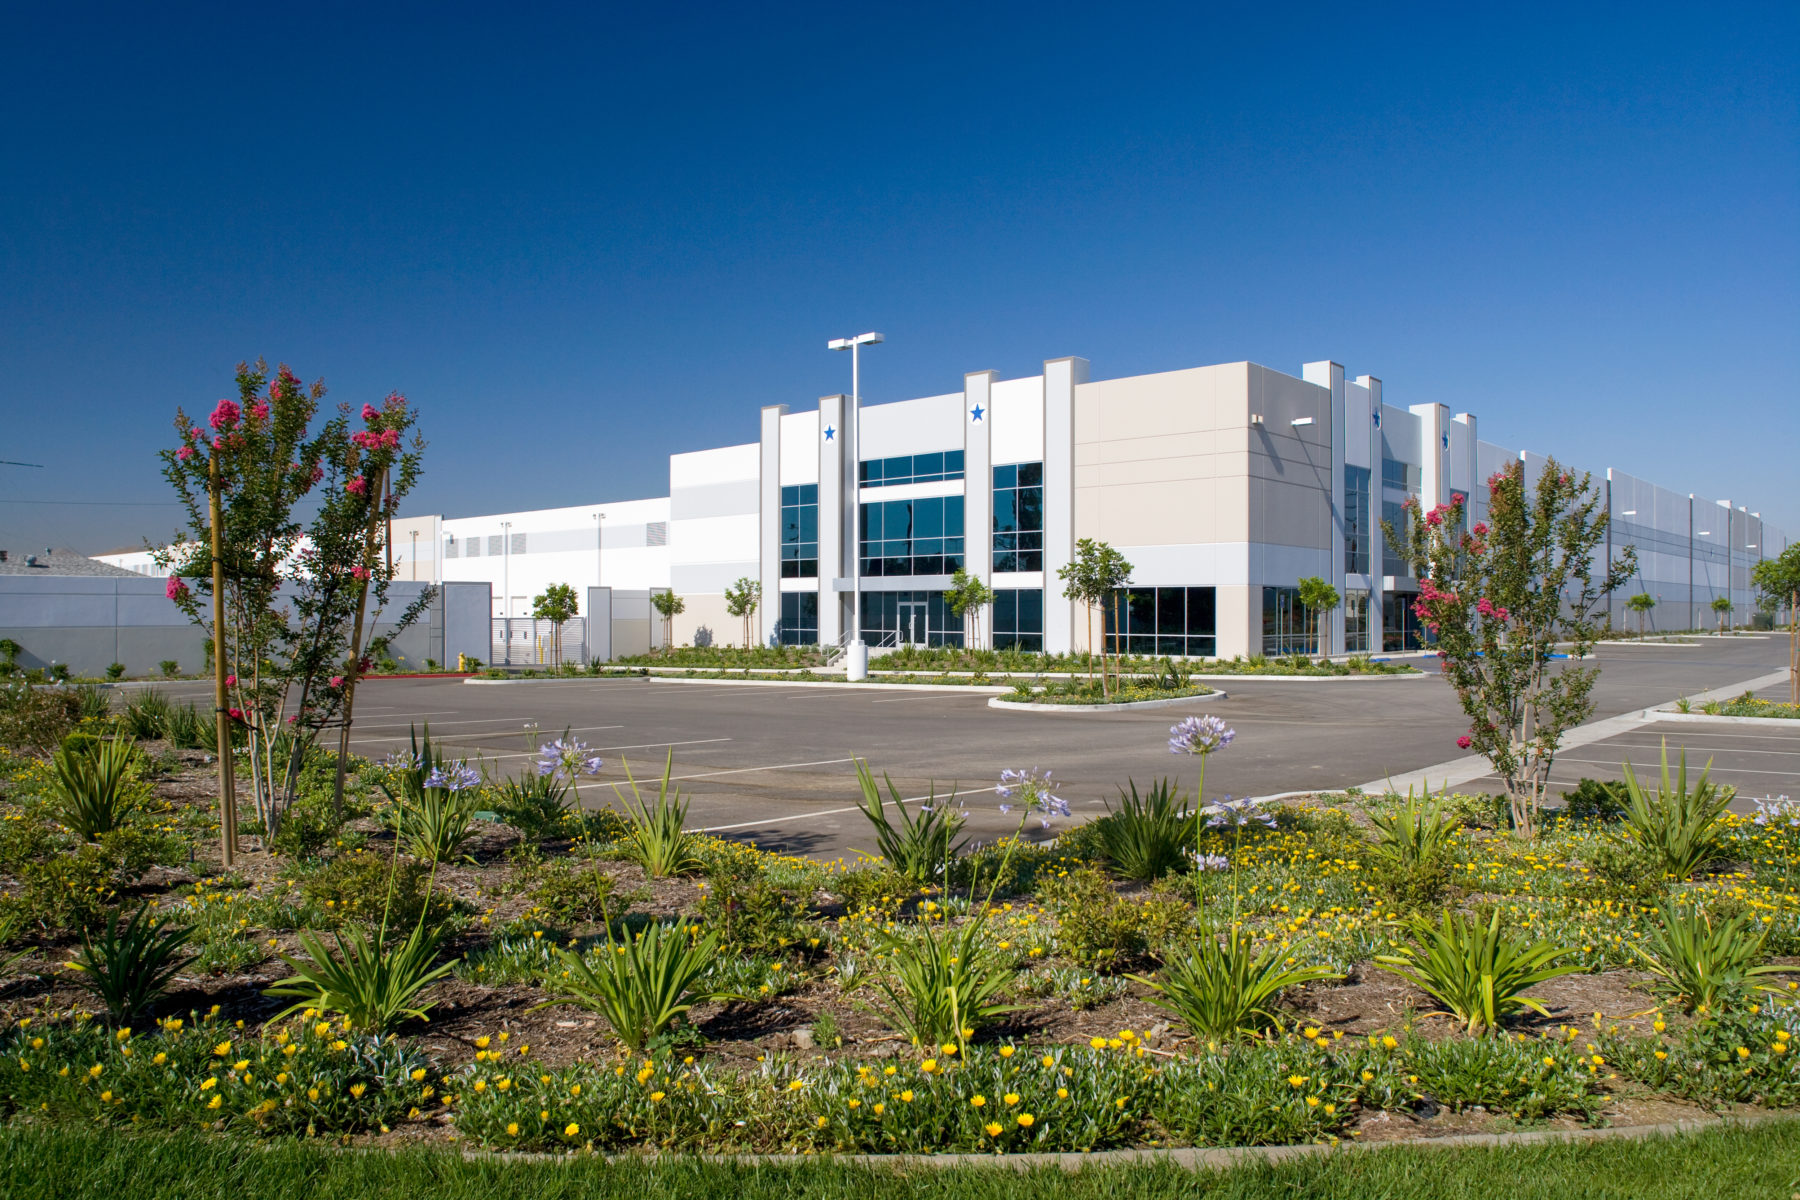 Plantings outside of the AllianceTexas industrial building